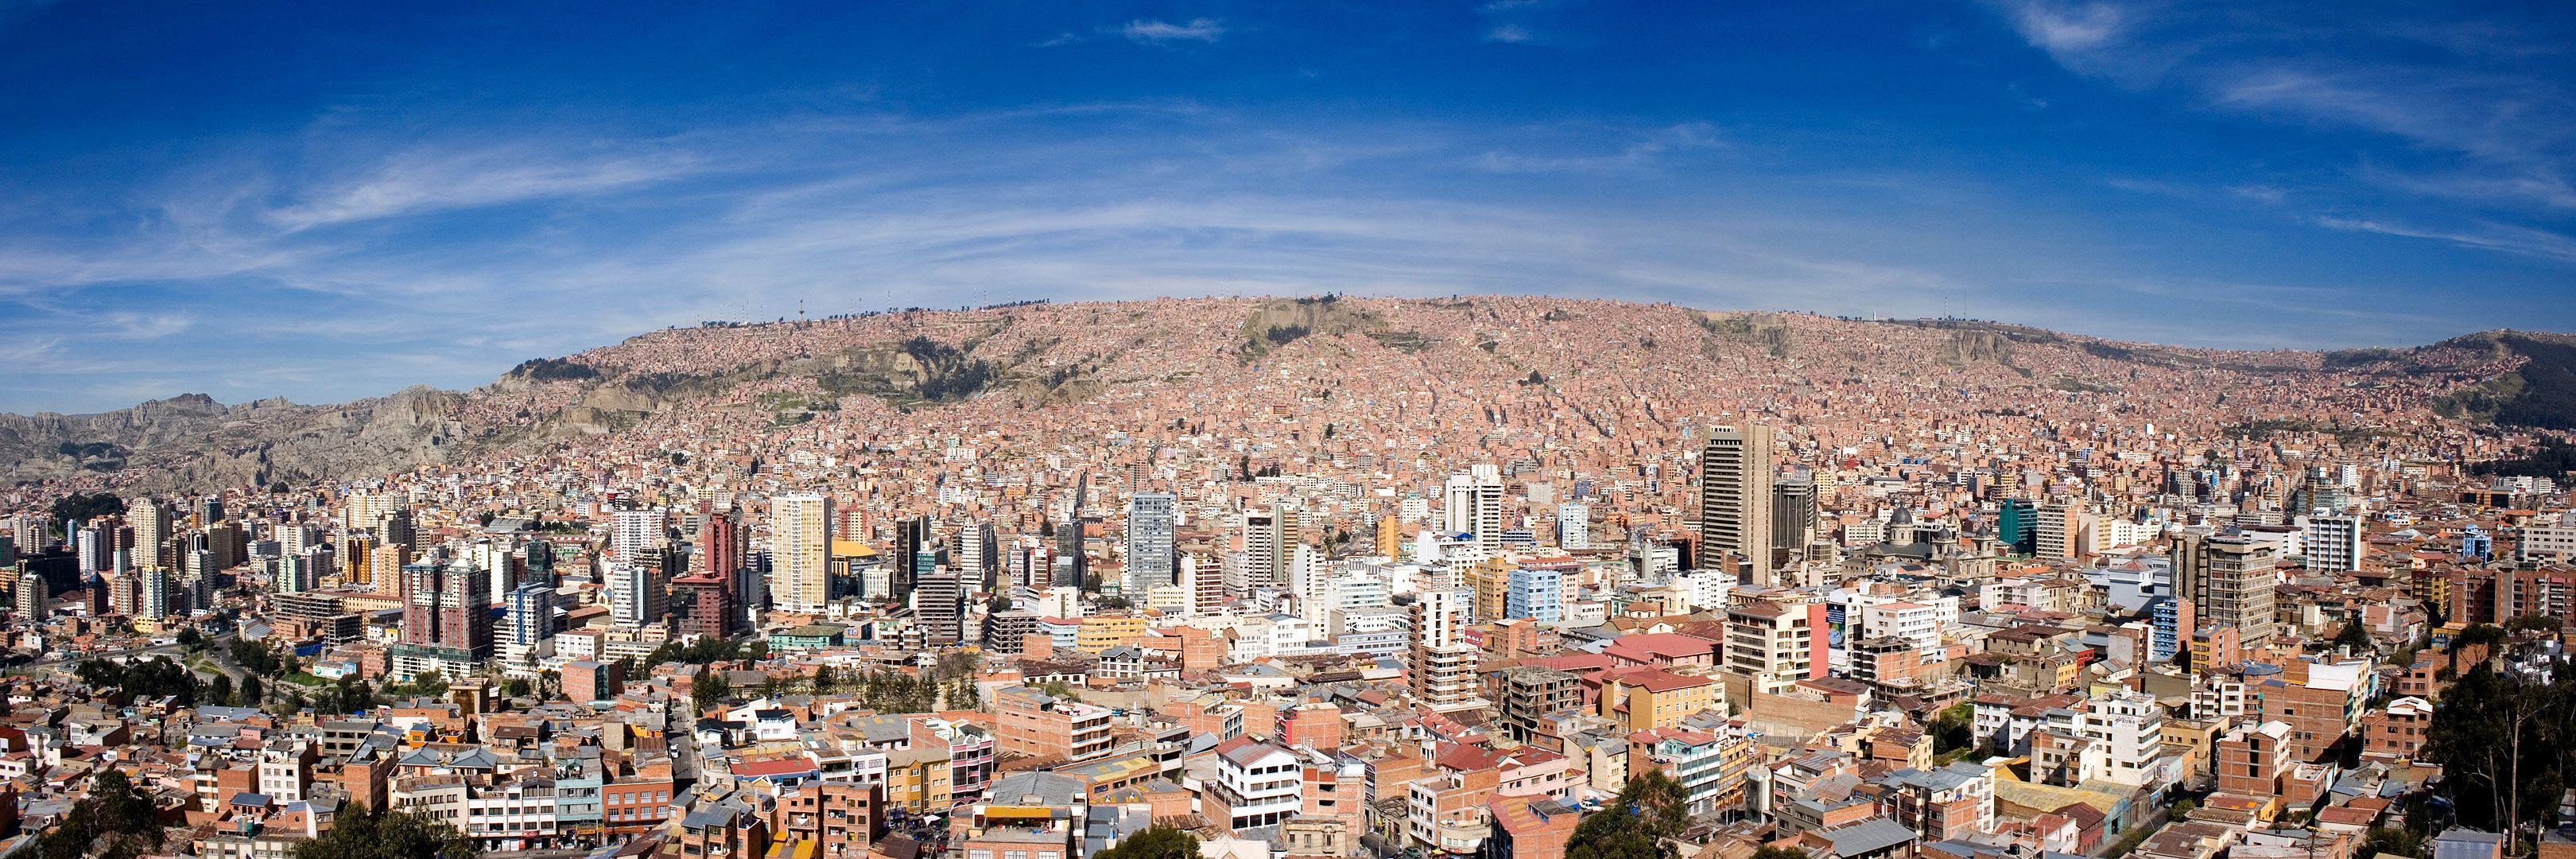 HD bolivia panorama Wallpaper Post has been published